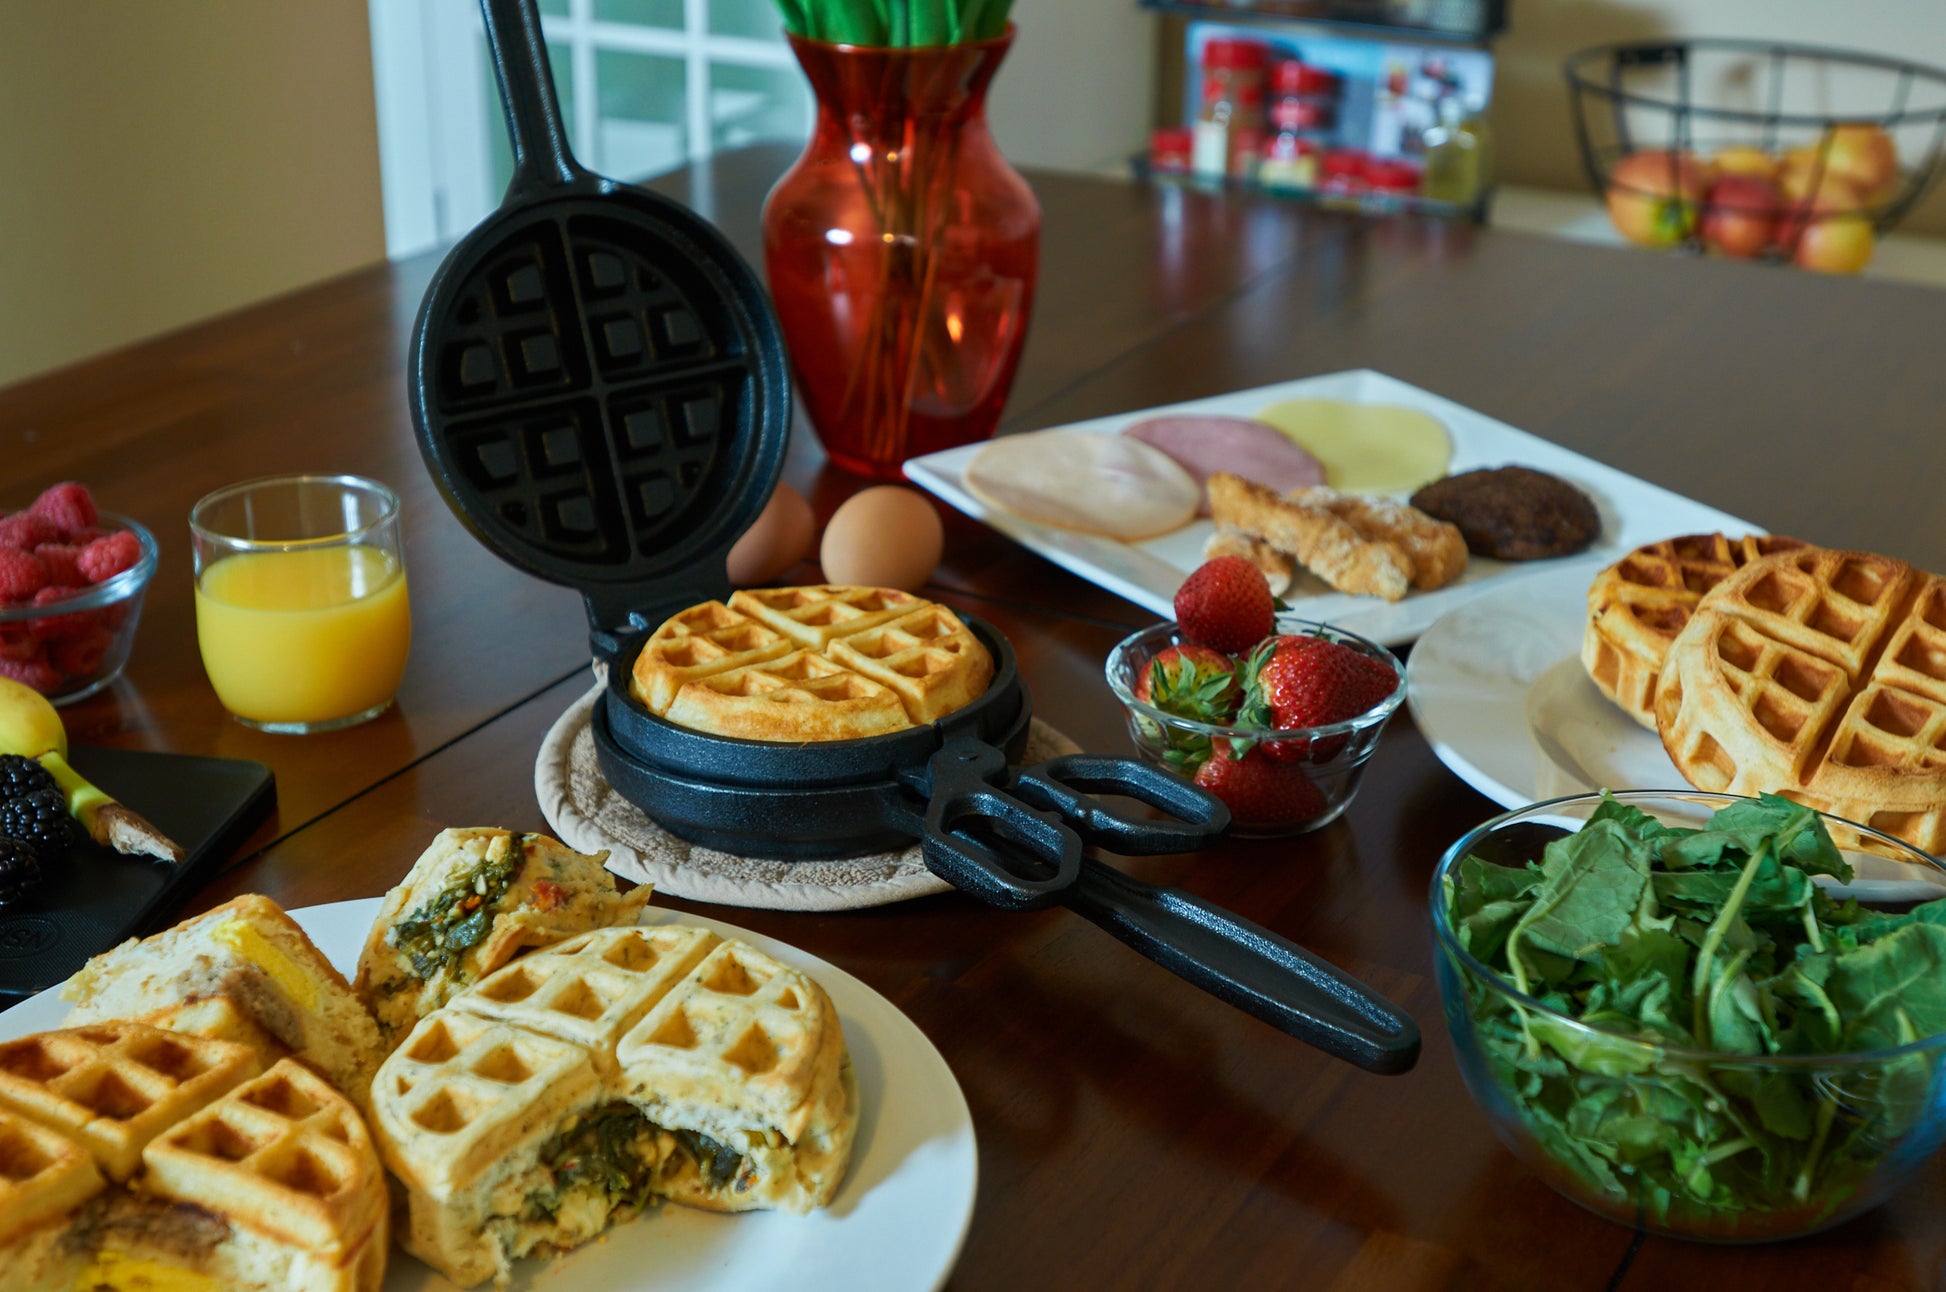 Wonderffle - Stuffed Waffle Iron, Belgian Waffle Maker, Dual Nonstick Pans,  Cool-to-the-Touch Handles, Gas and Electric Stovetop Compatible Waffle